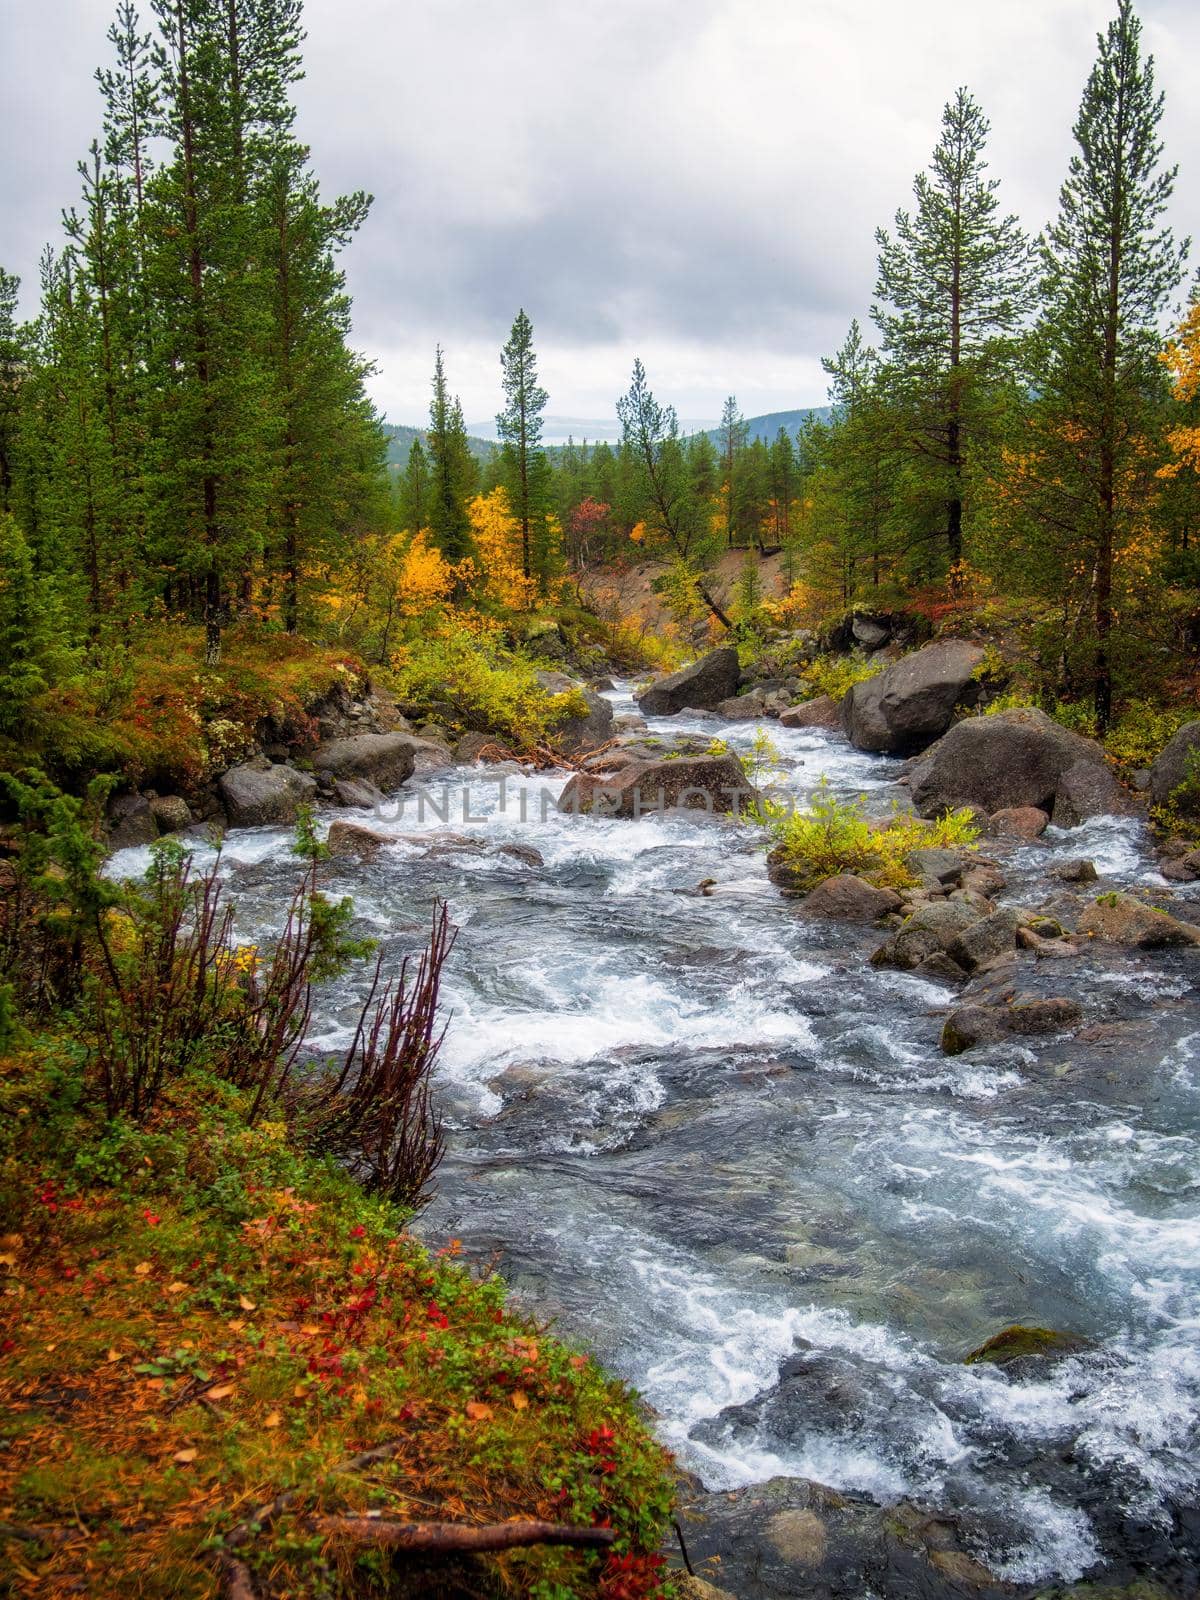 River in the Khibiny mountains in autumn. Autumn landscape by Andre1ns